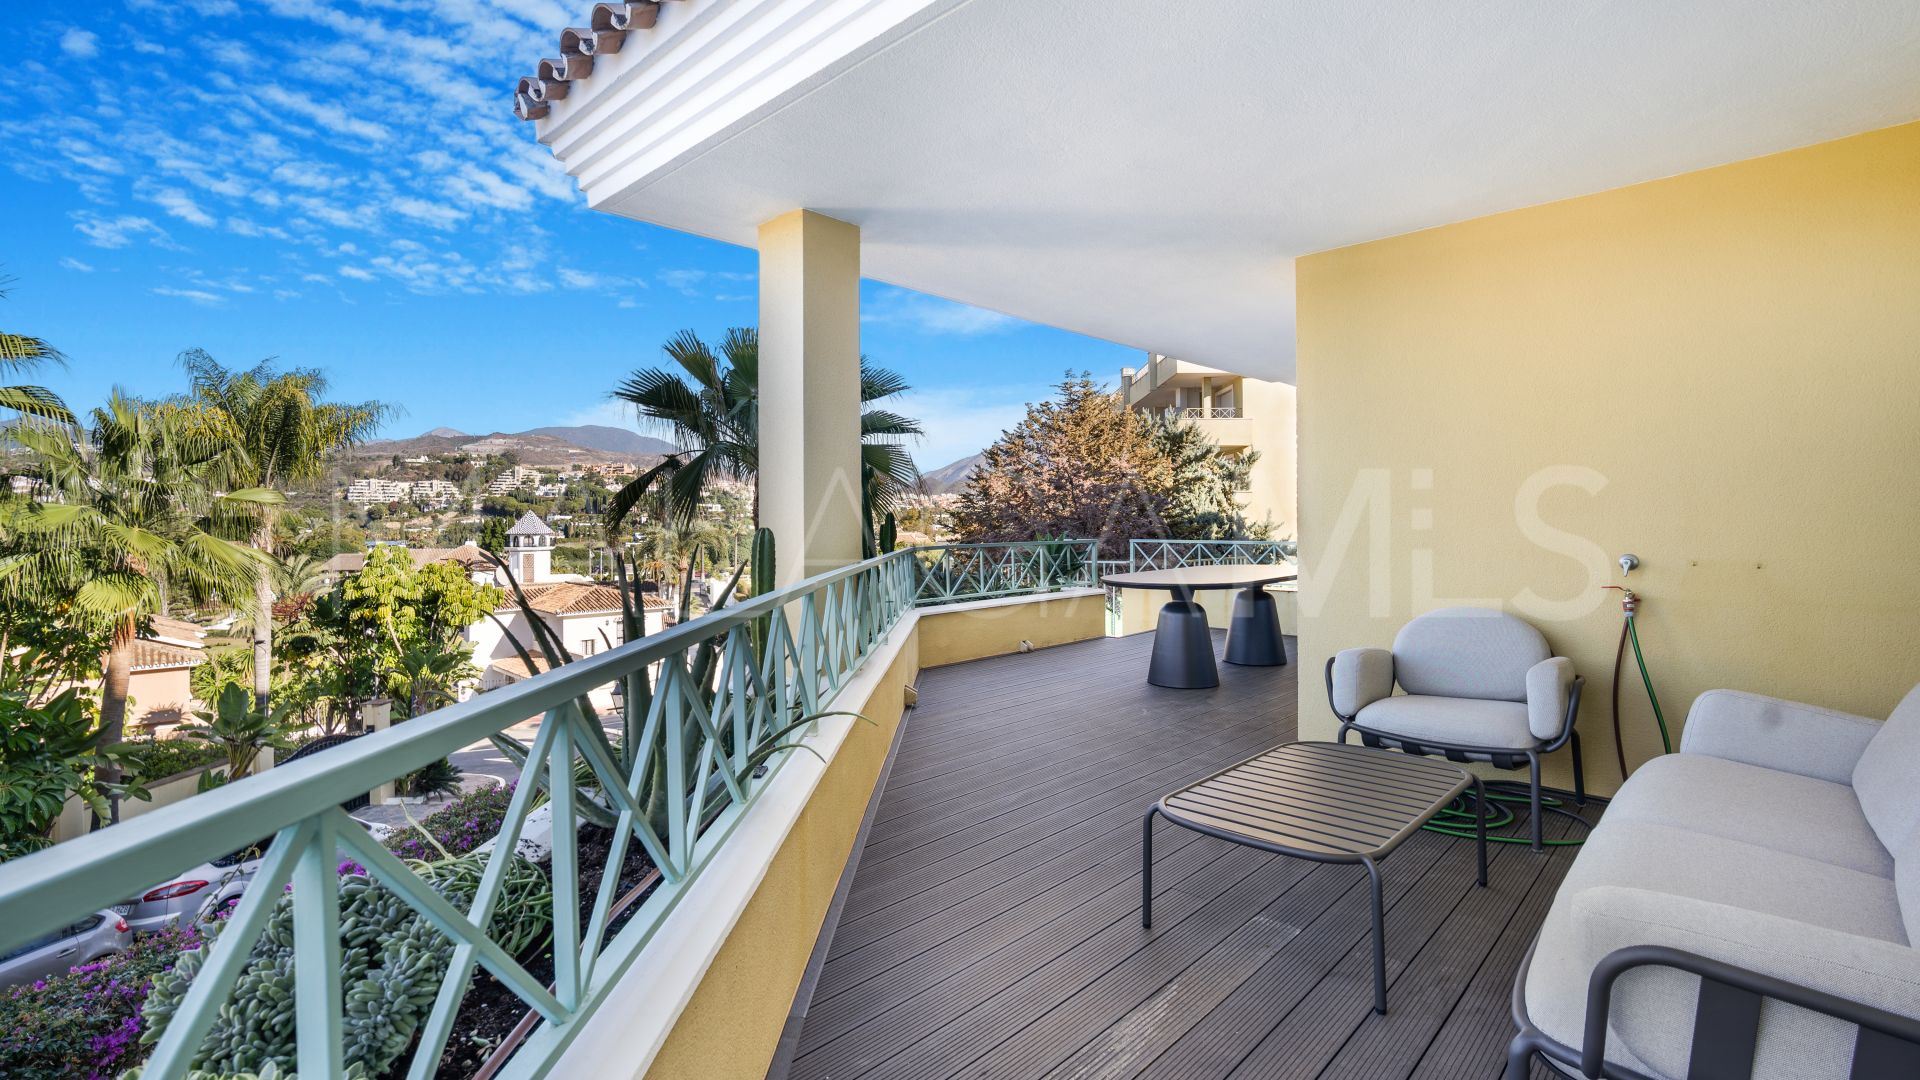 3 bedrooms Los Naranjos ground floor apartment for sale